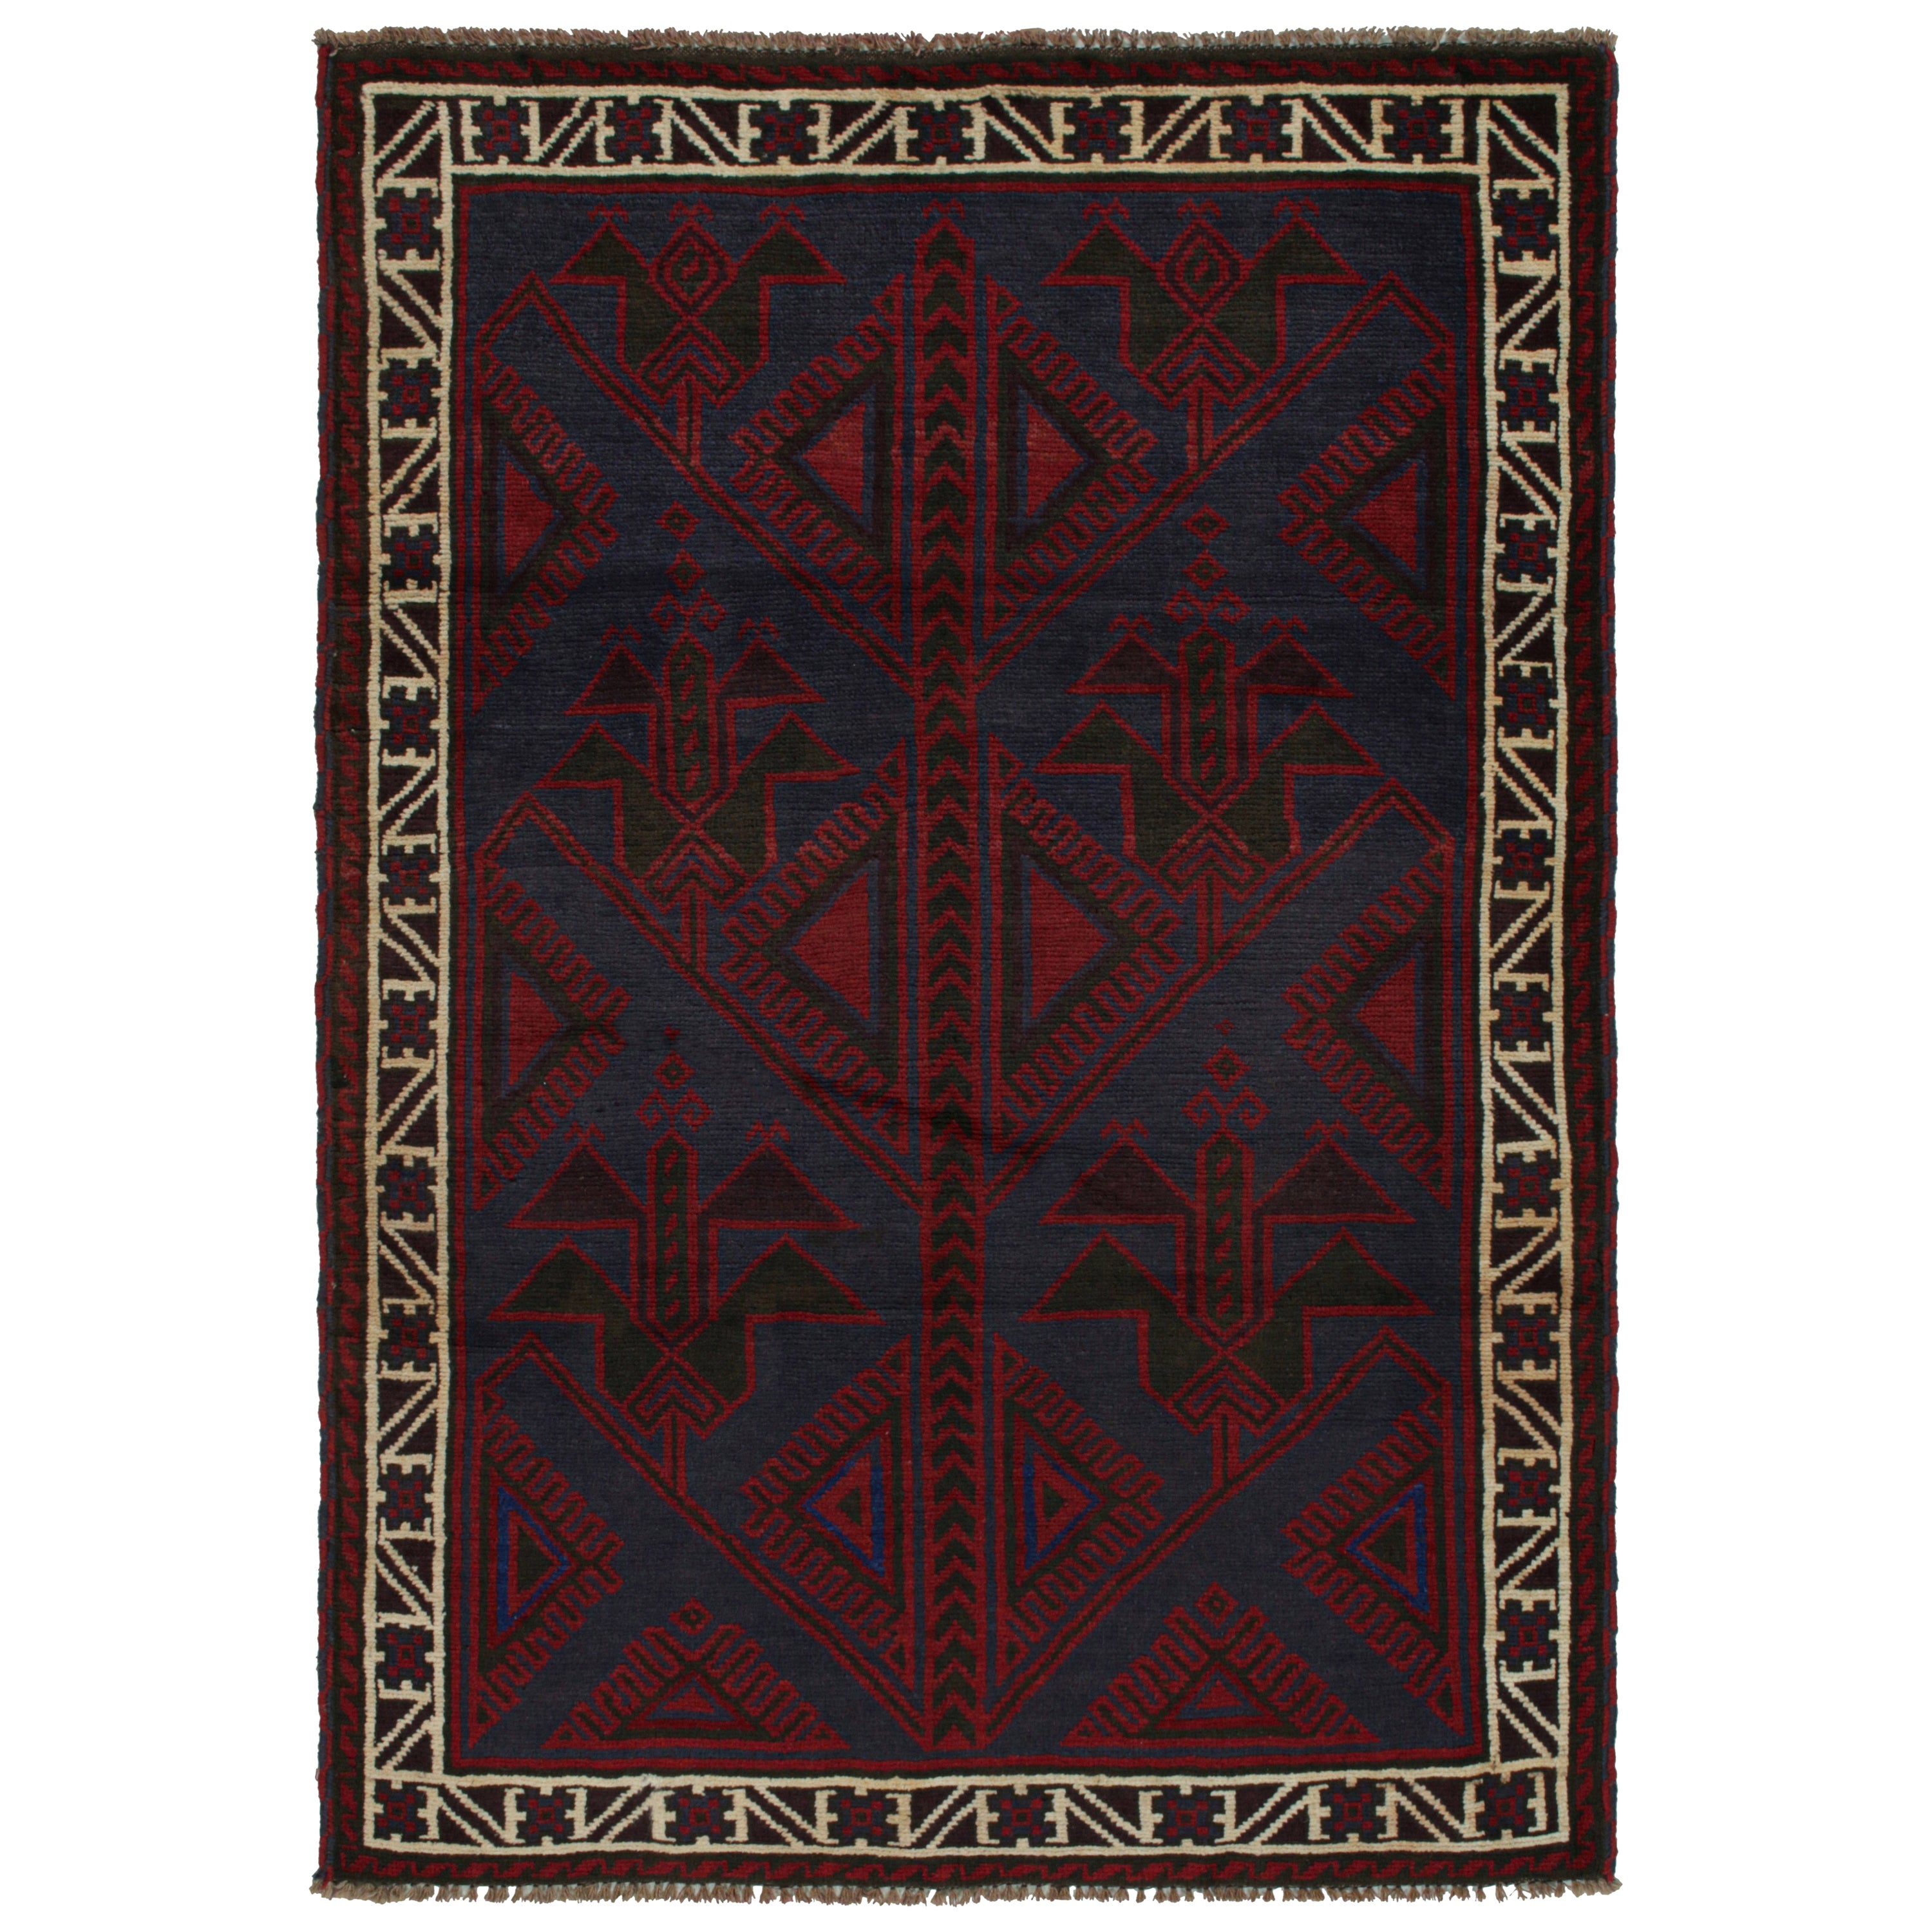 Vintage Baluch Tribal Rug in Red & Blue Geometric Patterns, from Rug & Kilim